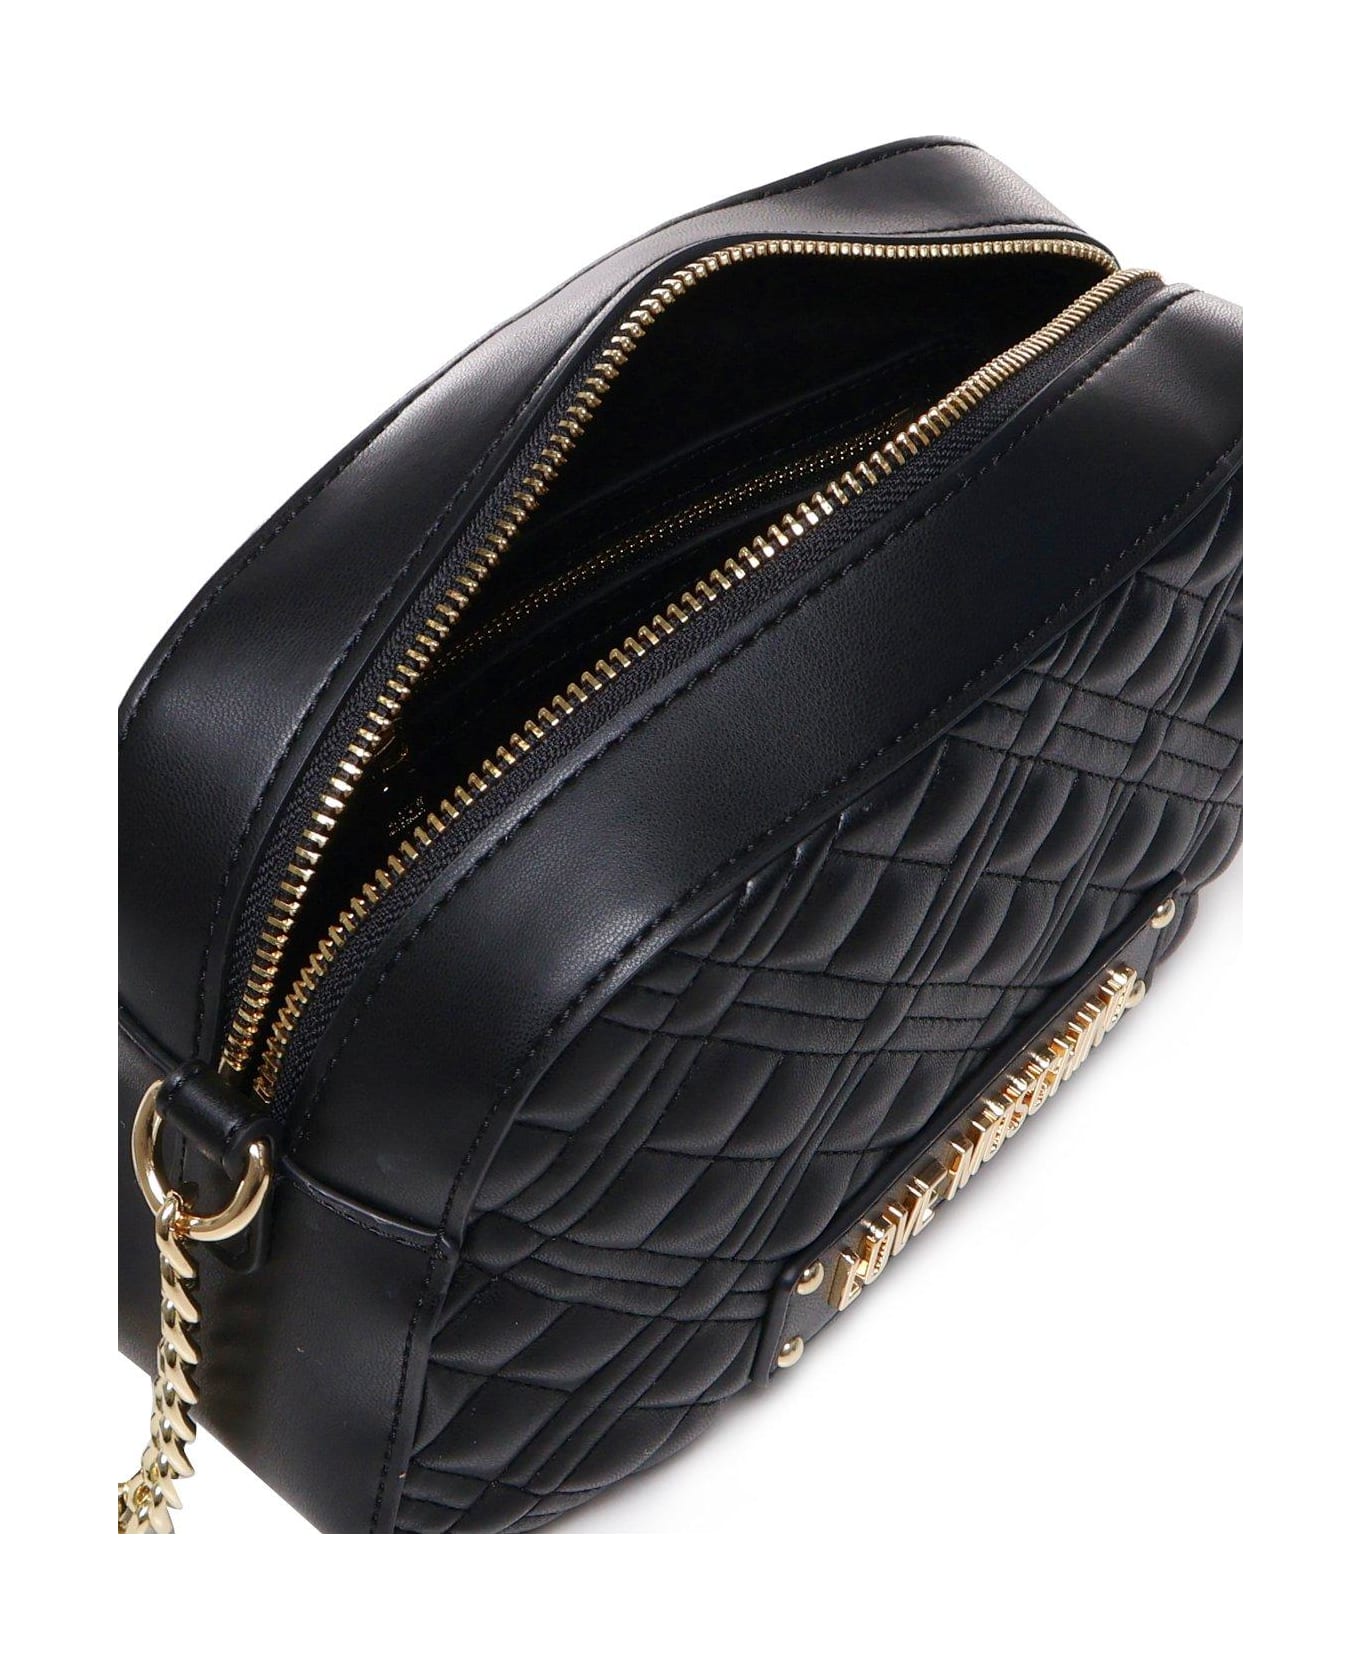 Moschino Logo Lettering Quilted Crossbody Bag - Nero